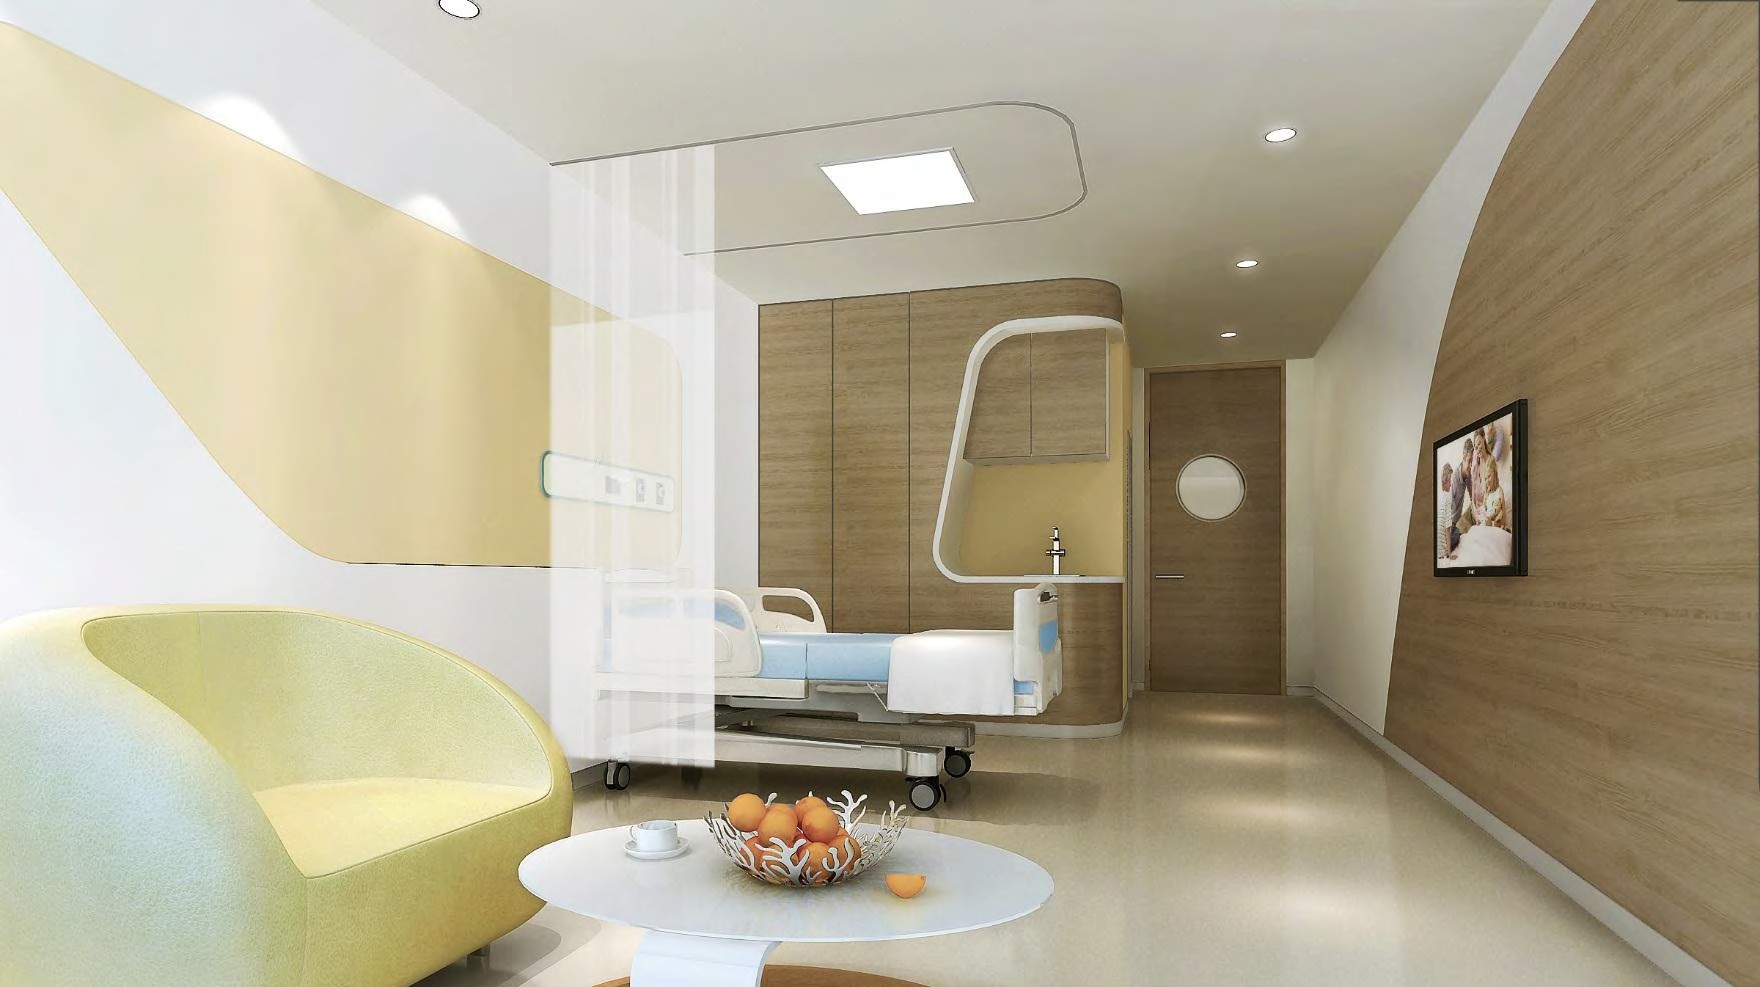 Room design of Huihe maternity and confinement center